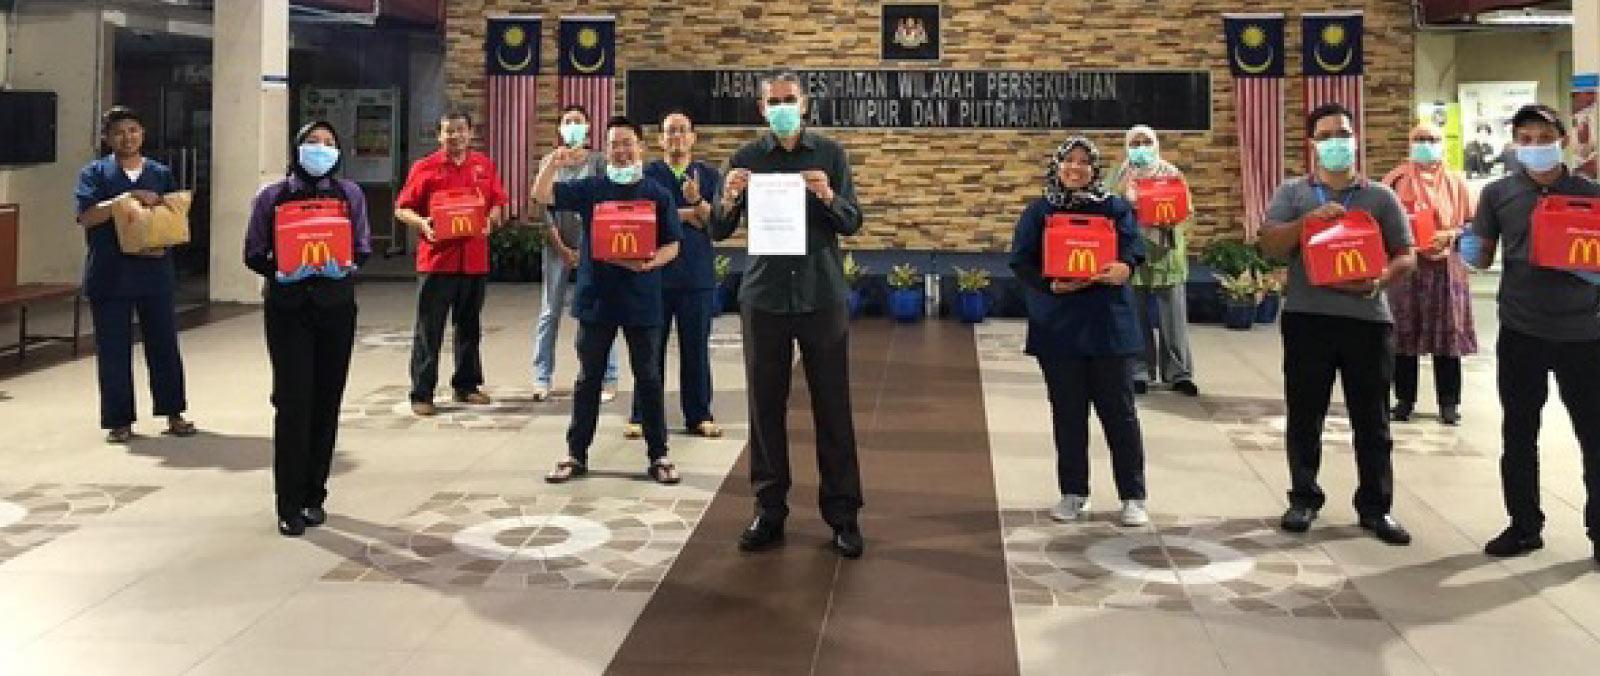 McDonald’s Malaysia Shows Appreciation to COVID-19 Frontliners's image'